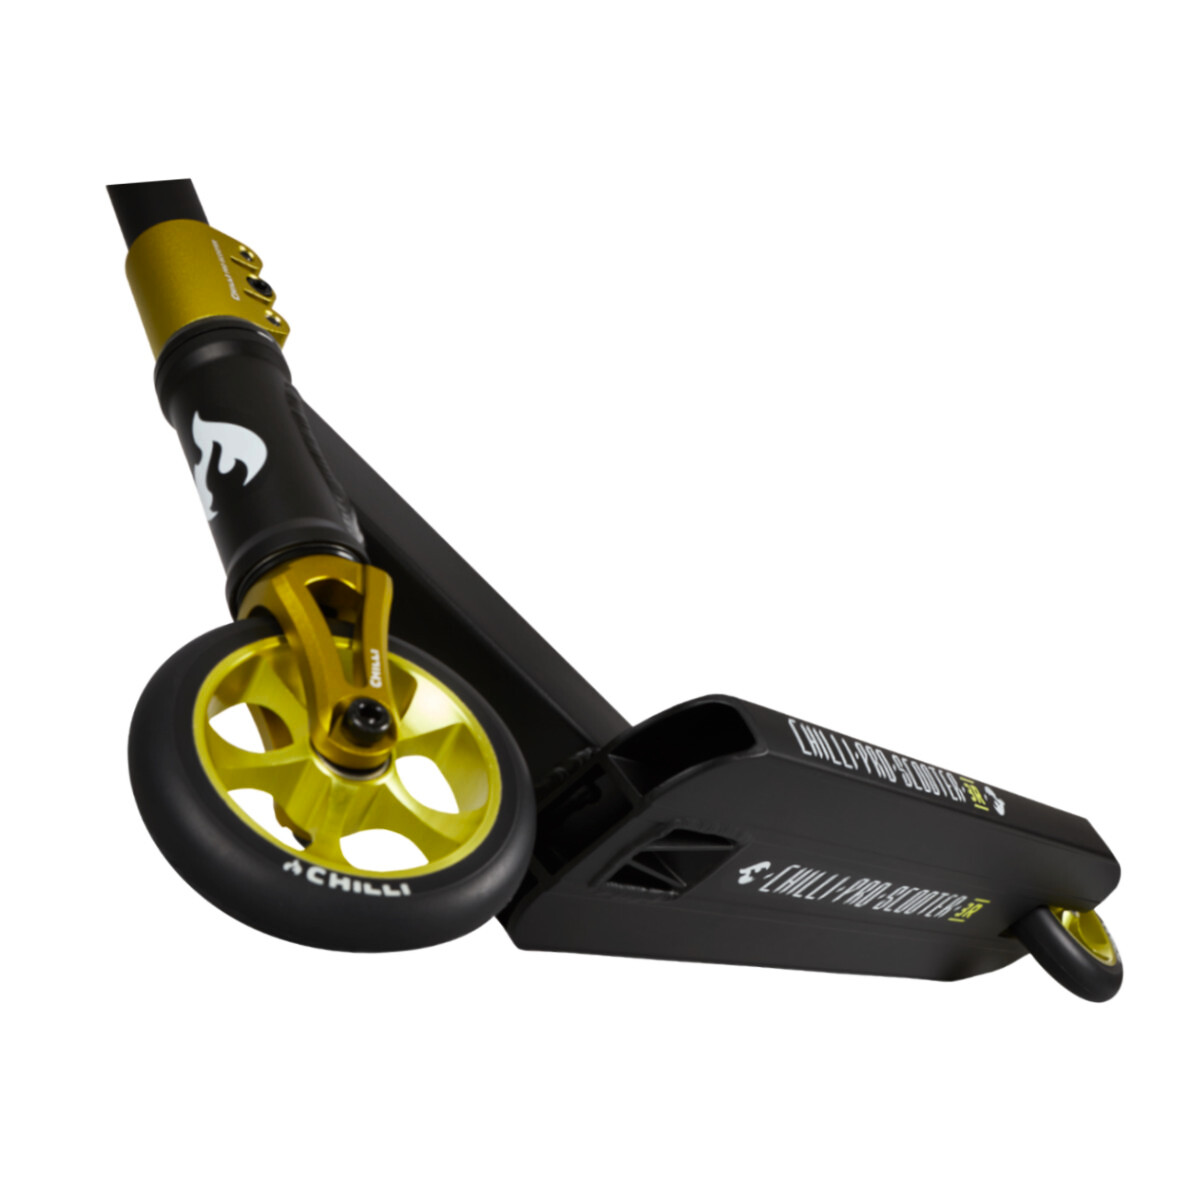 Freestyle Stunt-Scooter Chilli Pro Scooter  Reaper Reloaded Rebel Lime